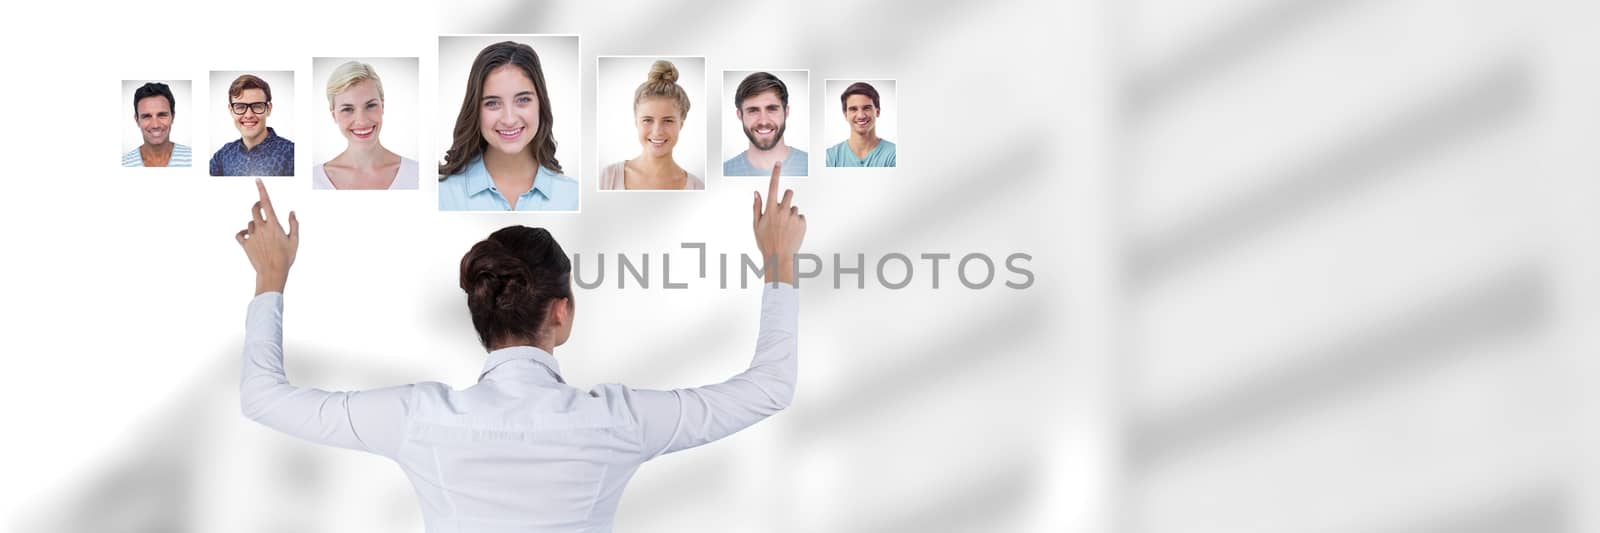 Digital composite of Woman touching portrait profiles of different people